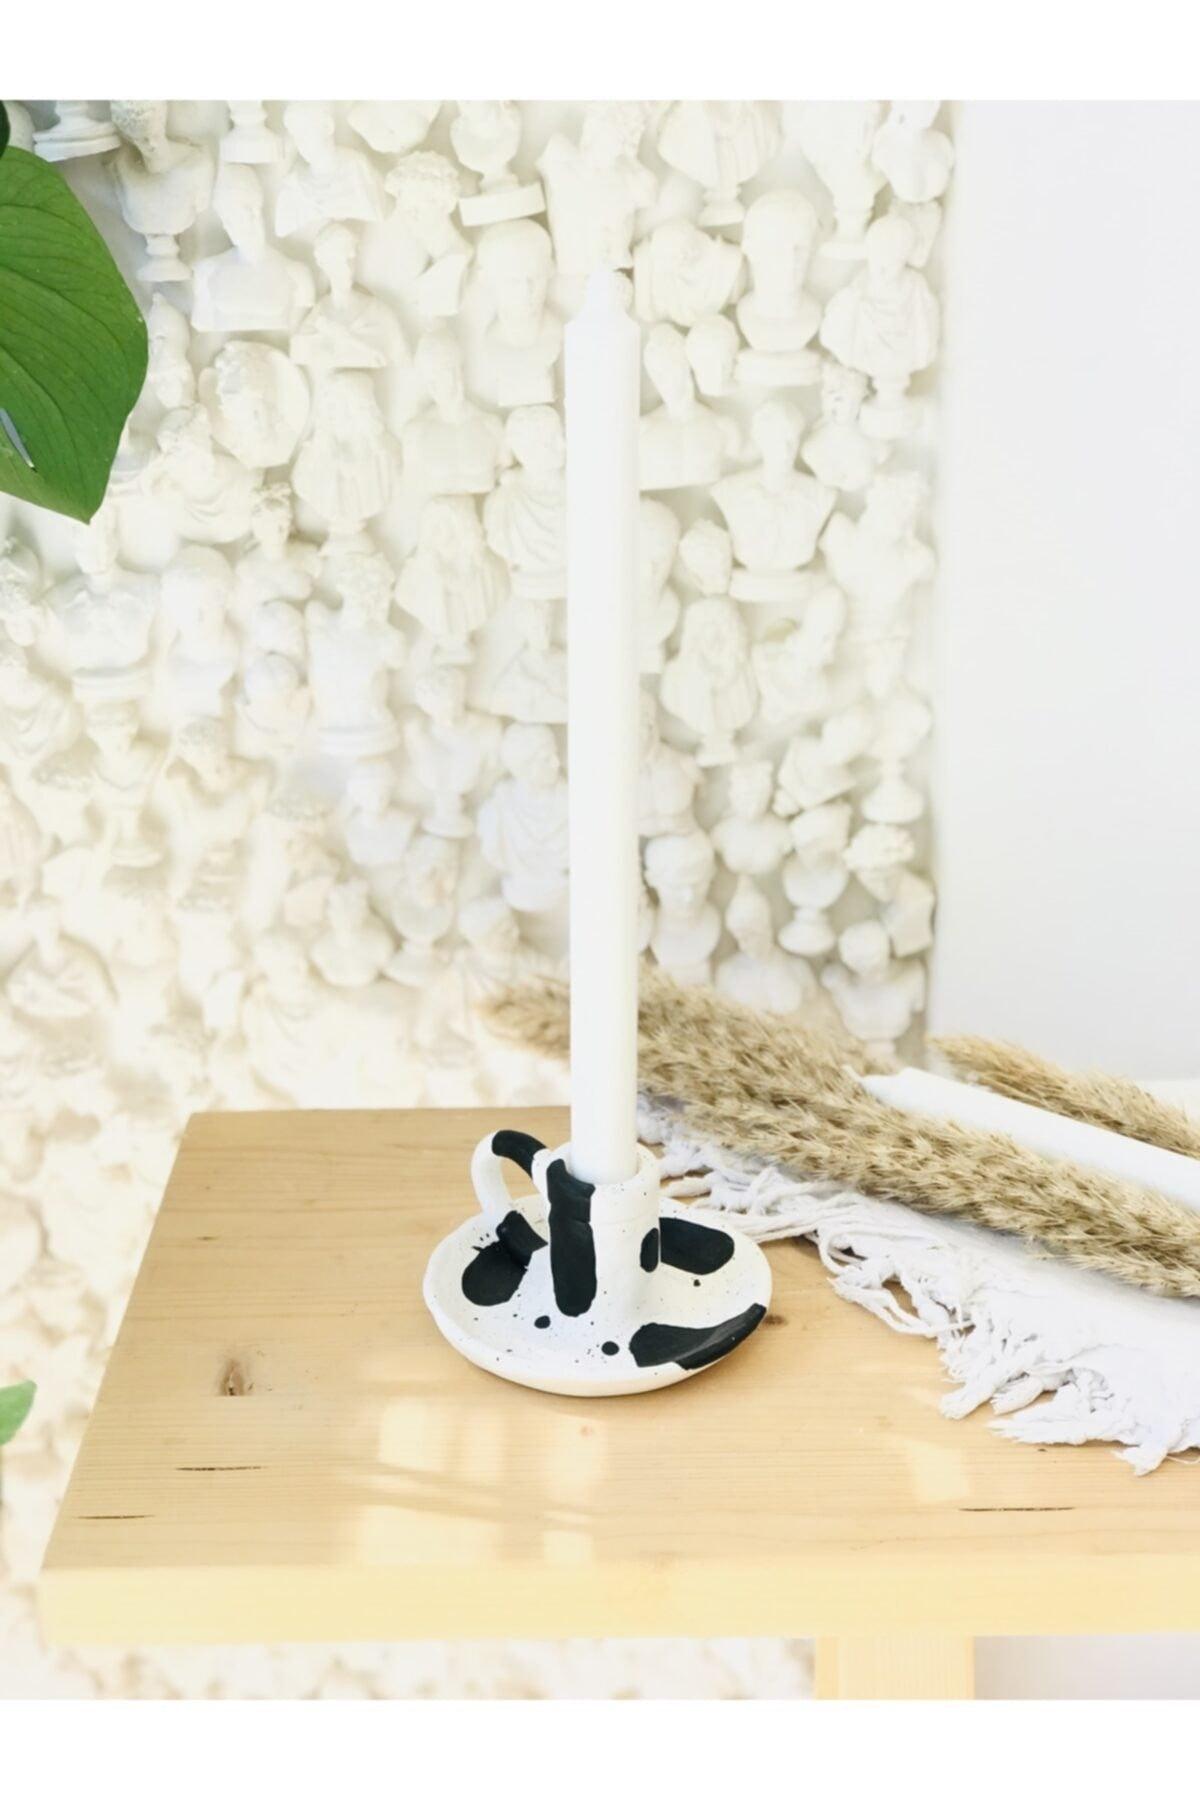 Abstract Black and White Handmade Candlestick with Handle